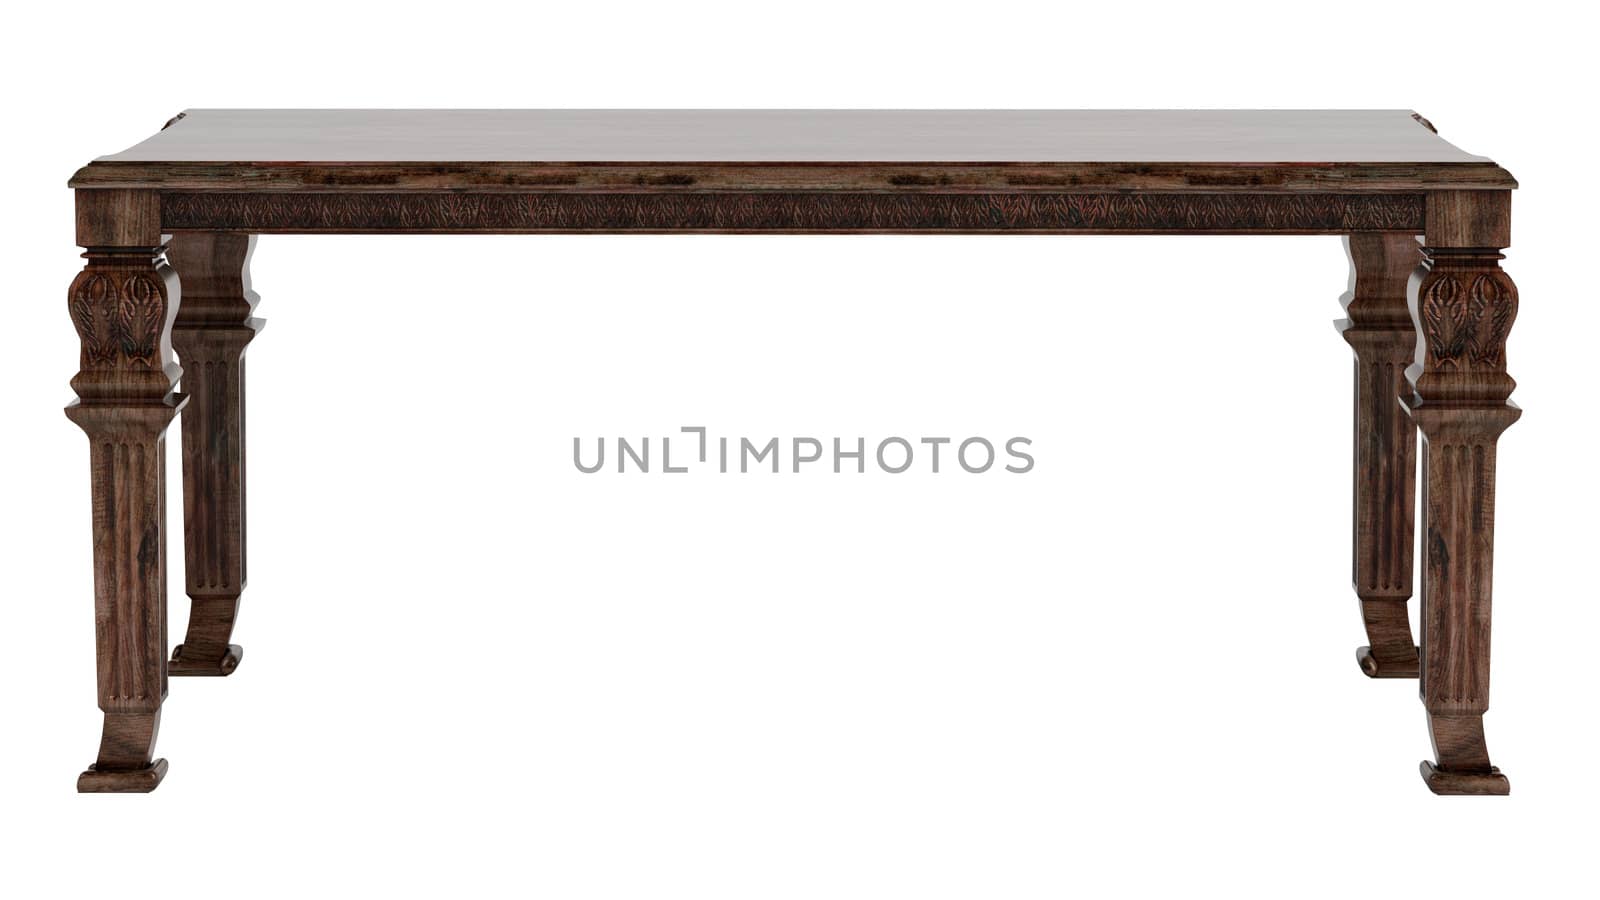 Antique wooden table isolated on white background